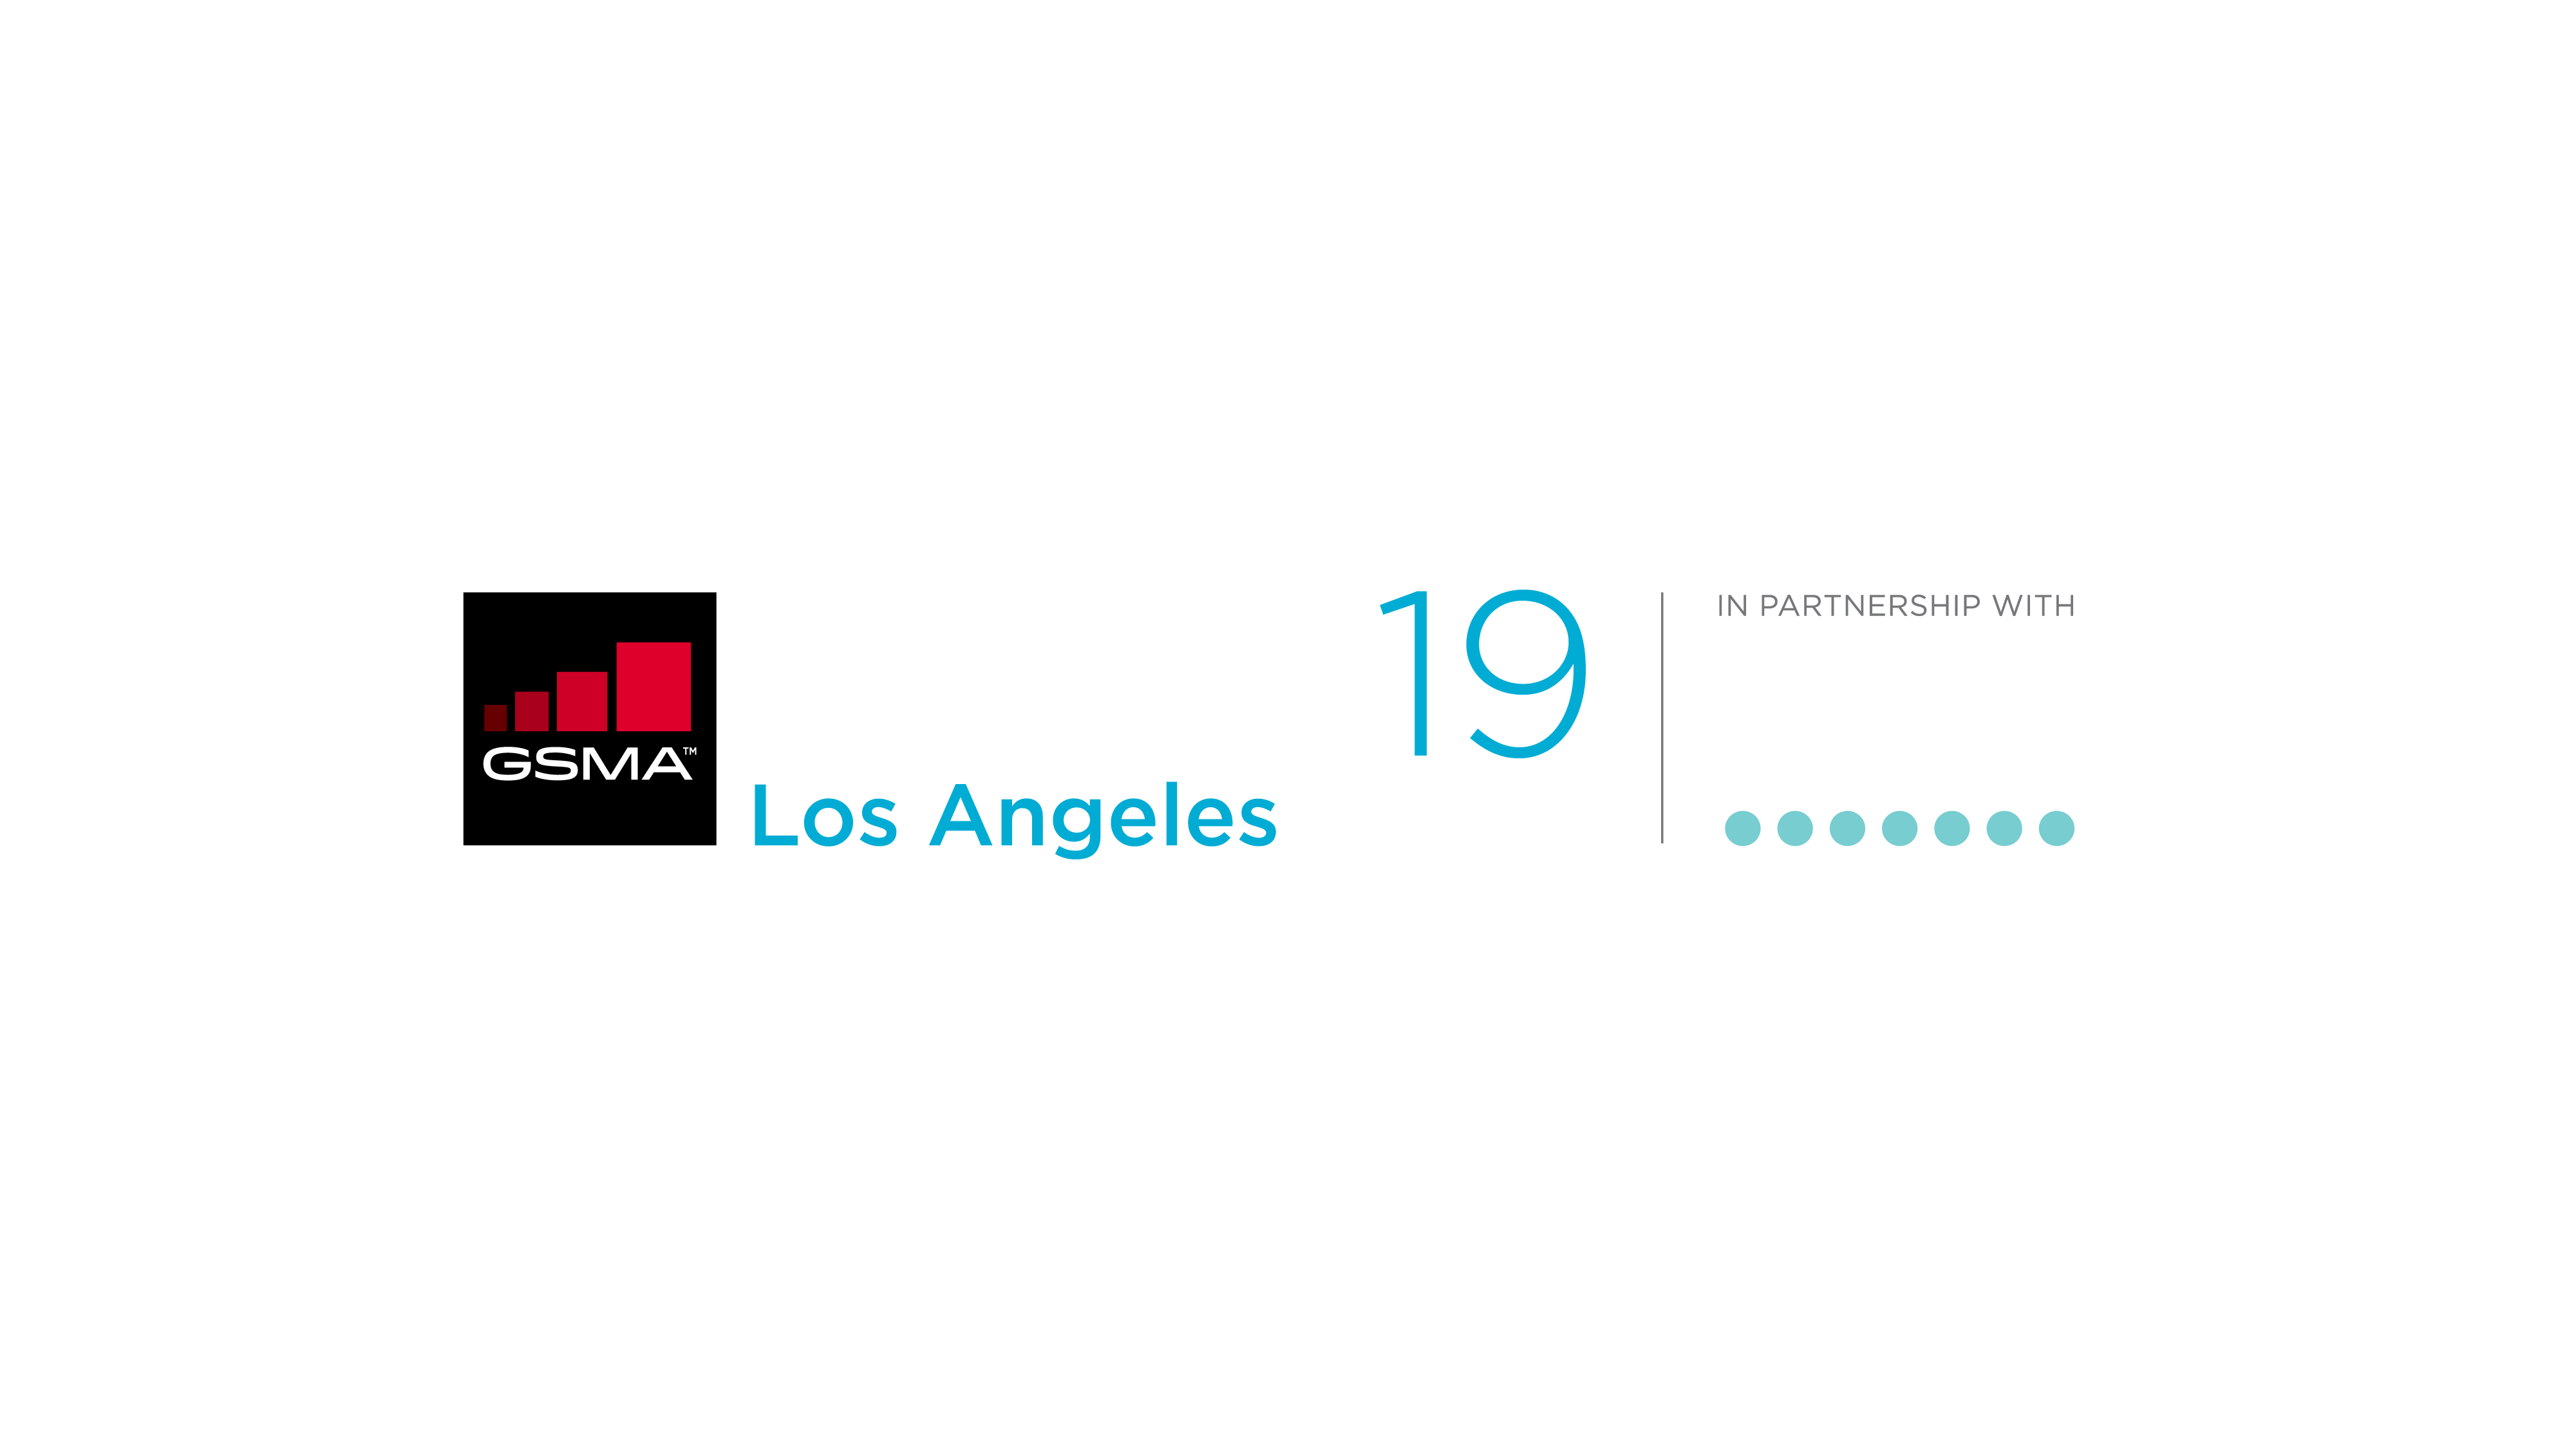 GSMA Logo - MWC Los Angeles - Join us in October 22-24, 2019